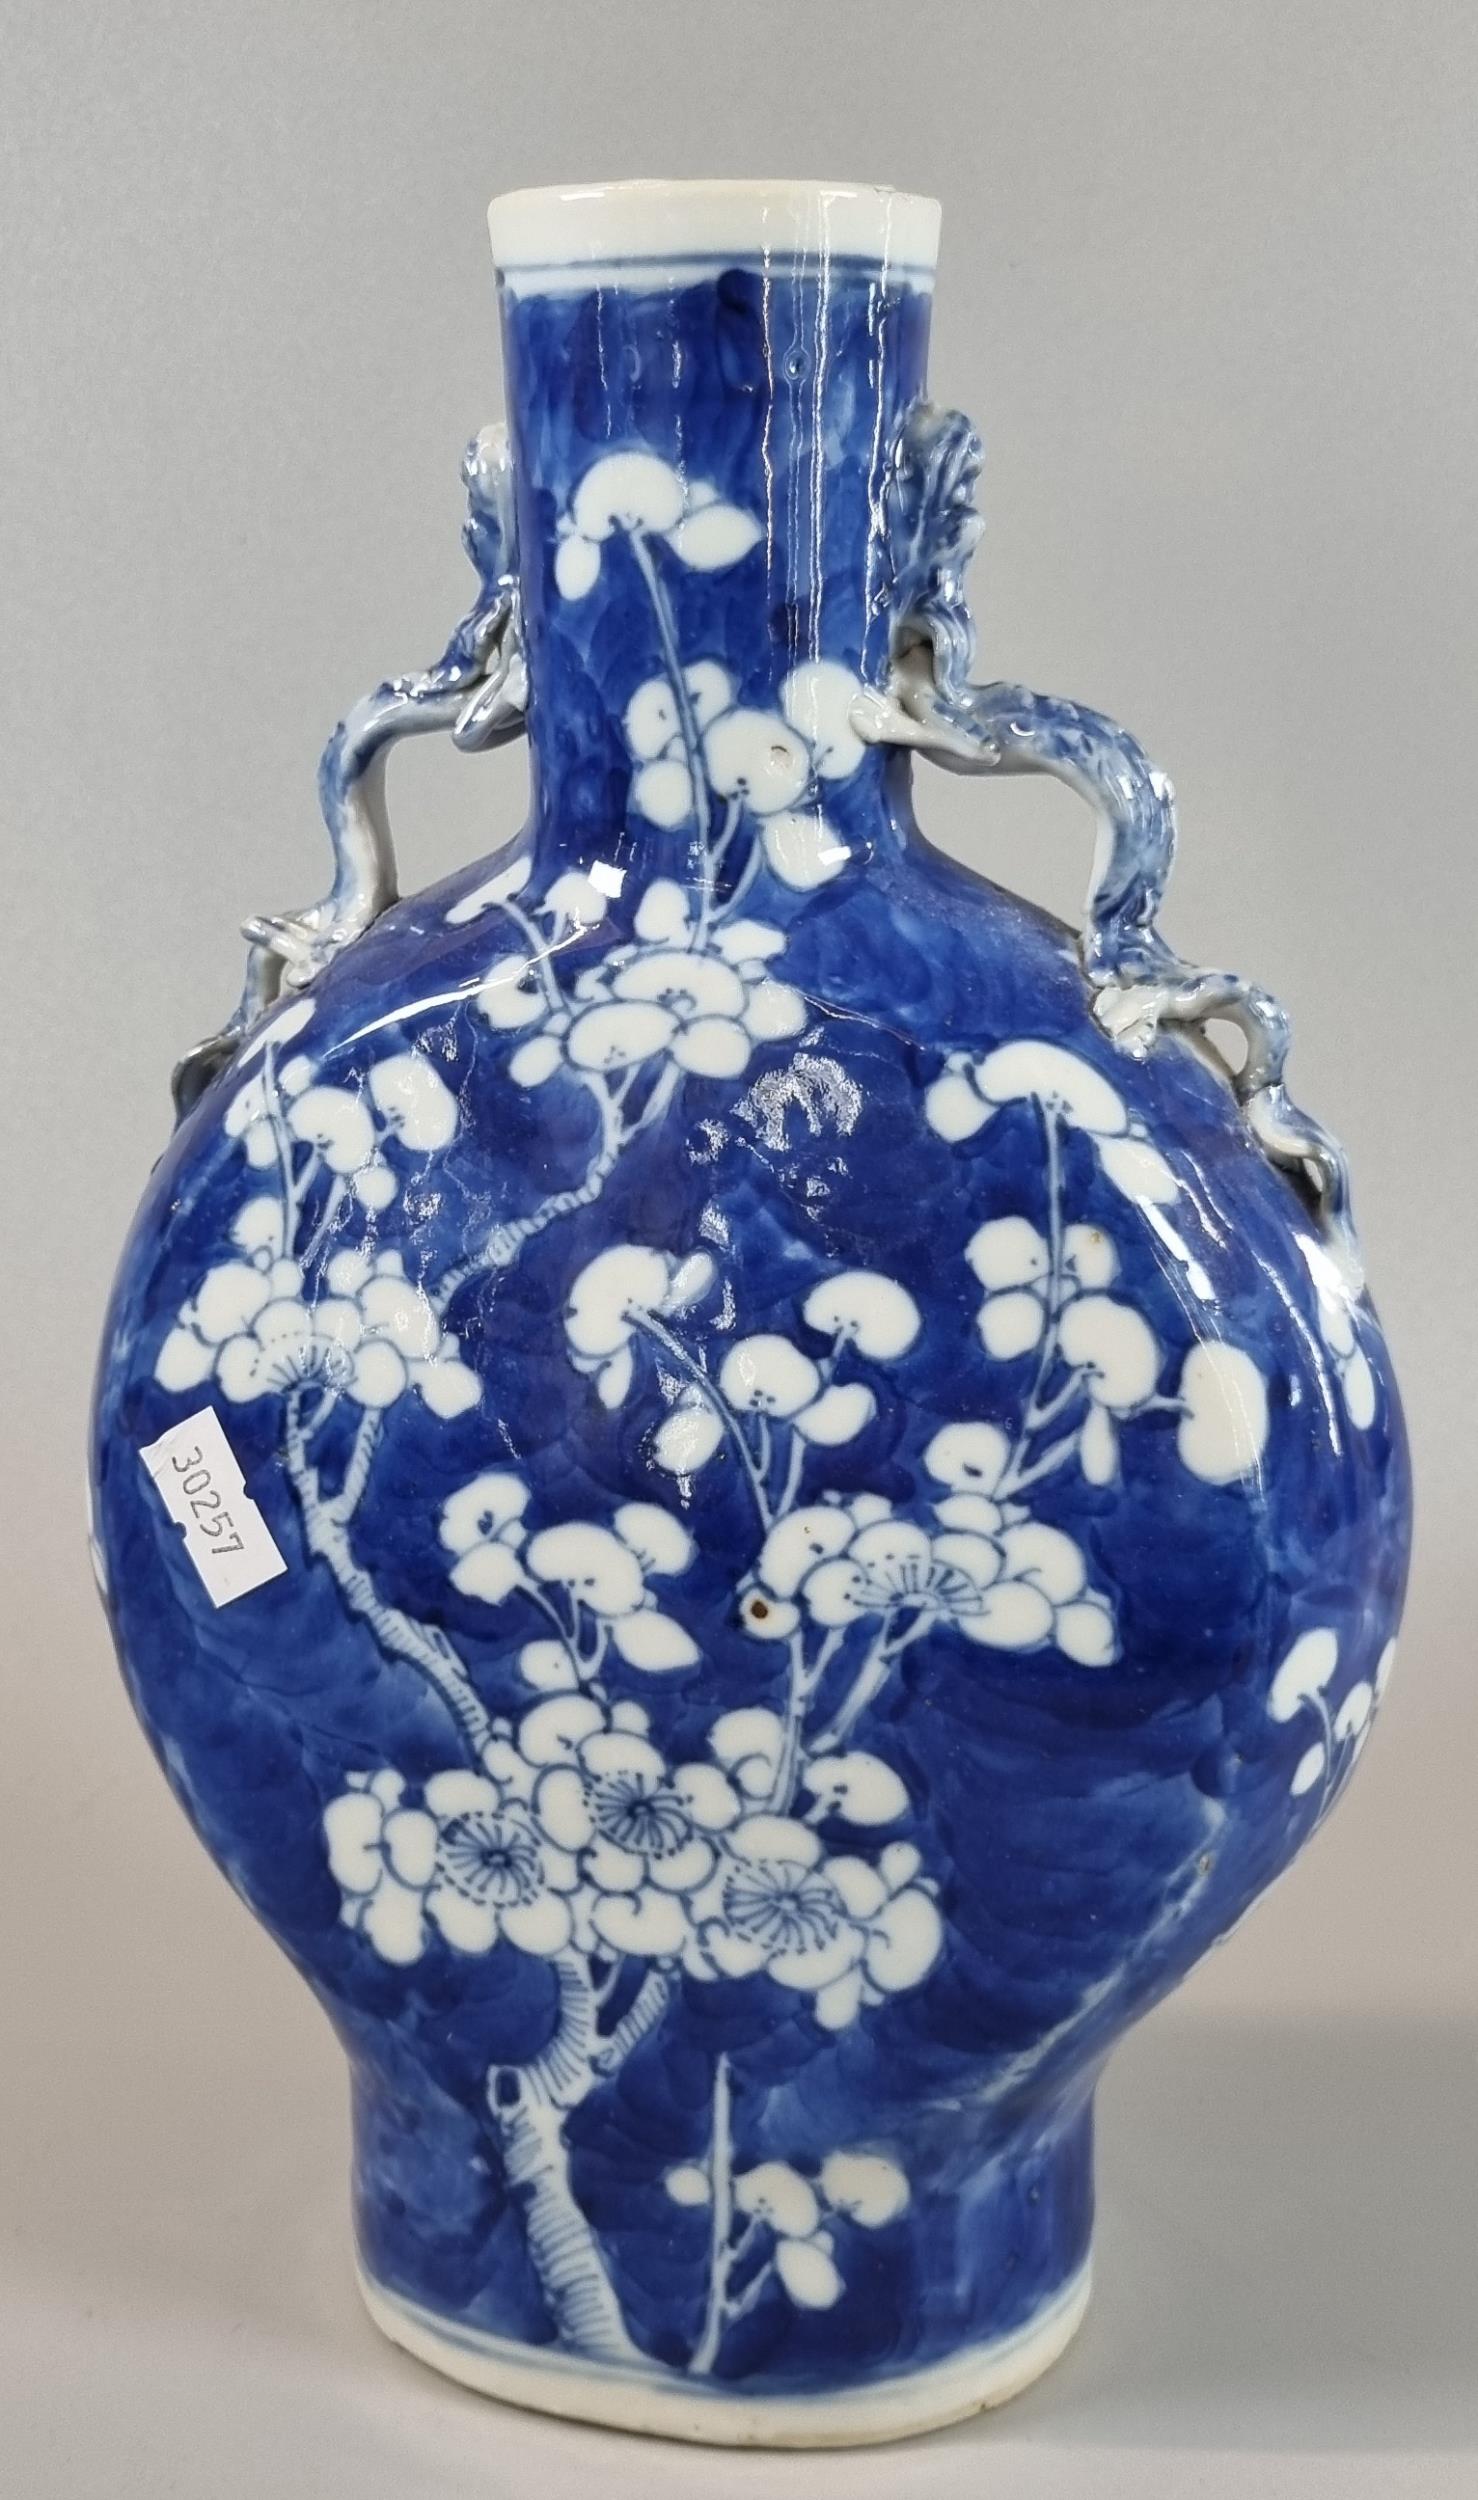 19th century Chinese export porcelain blue and white moon flask, depicting flower and prunus